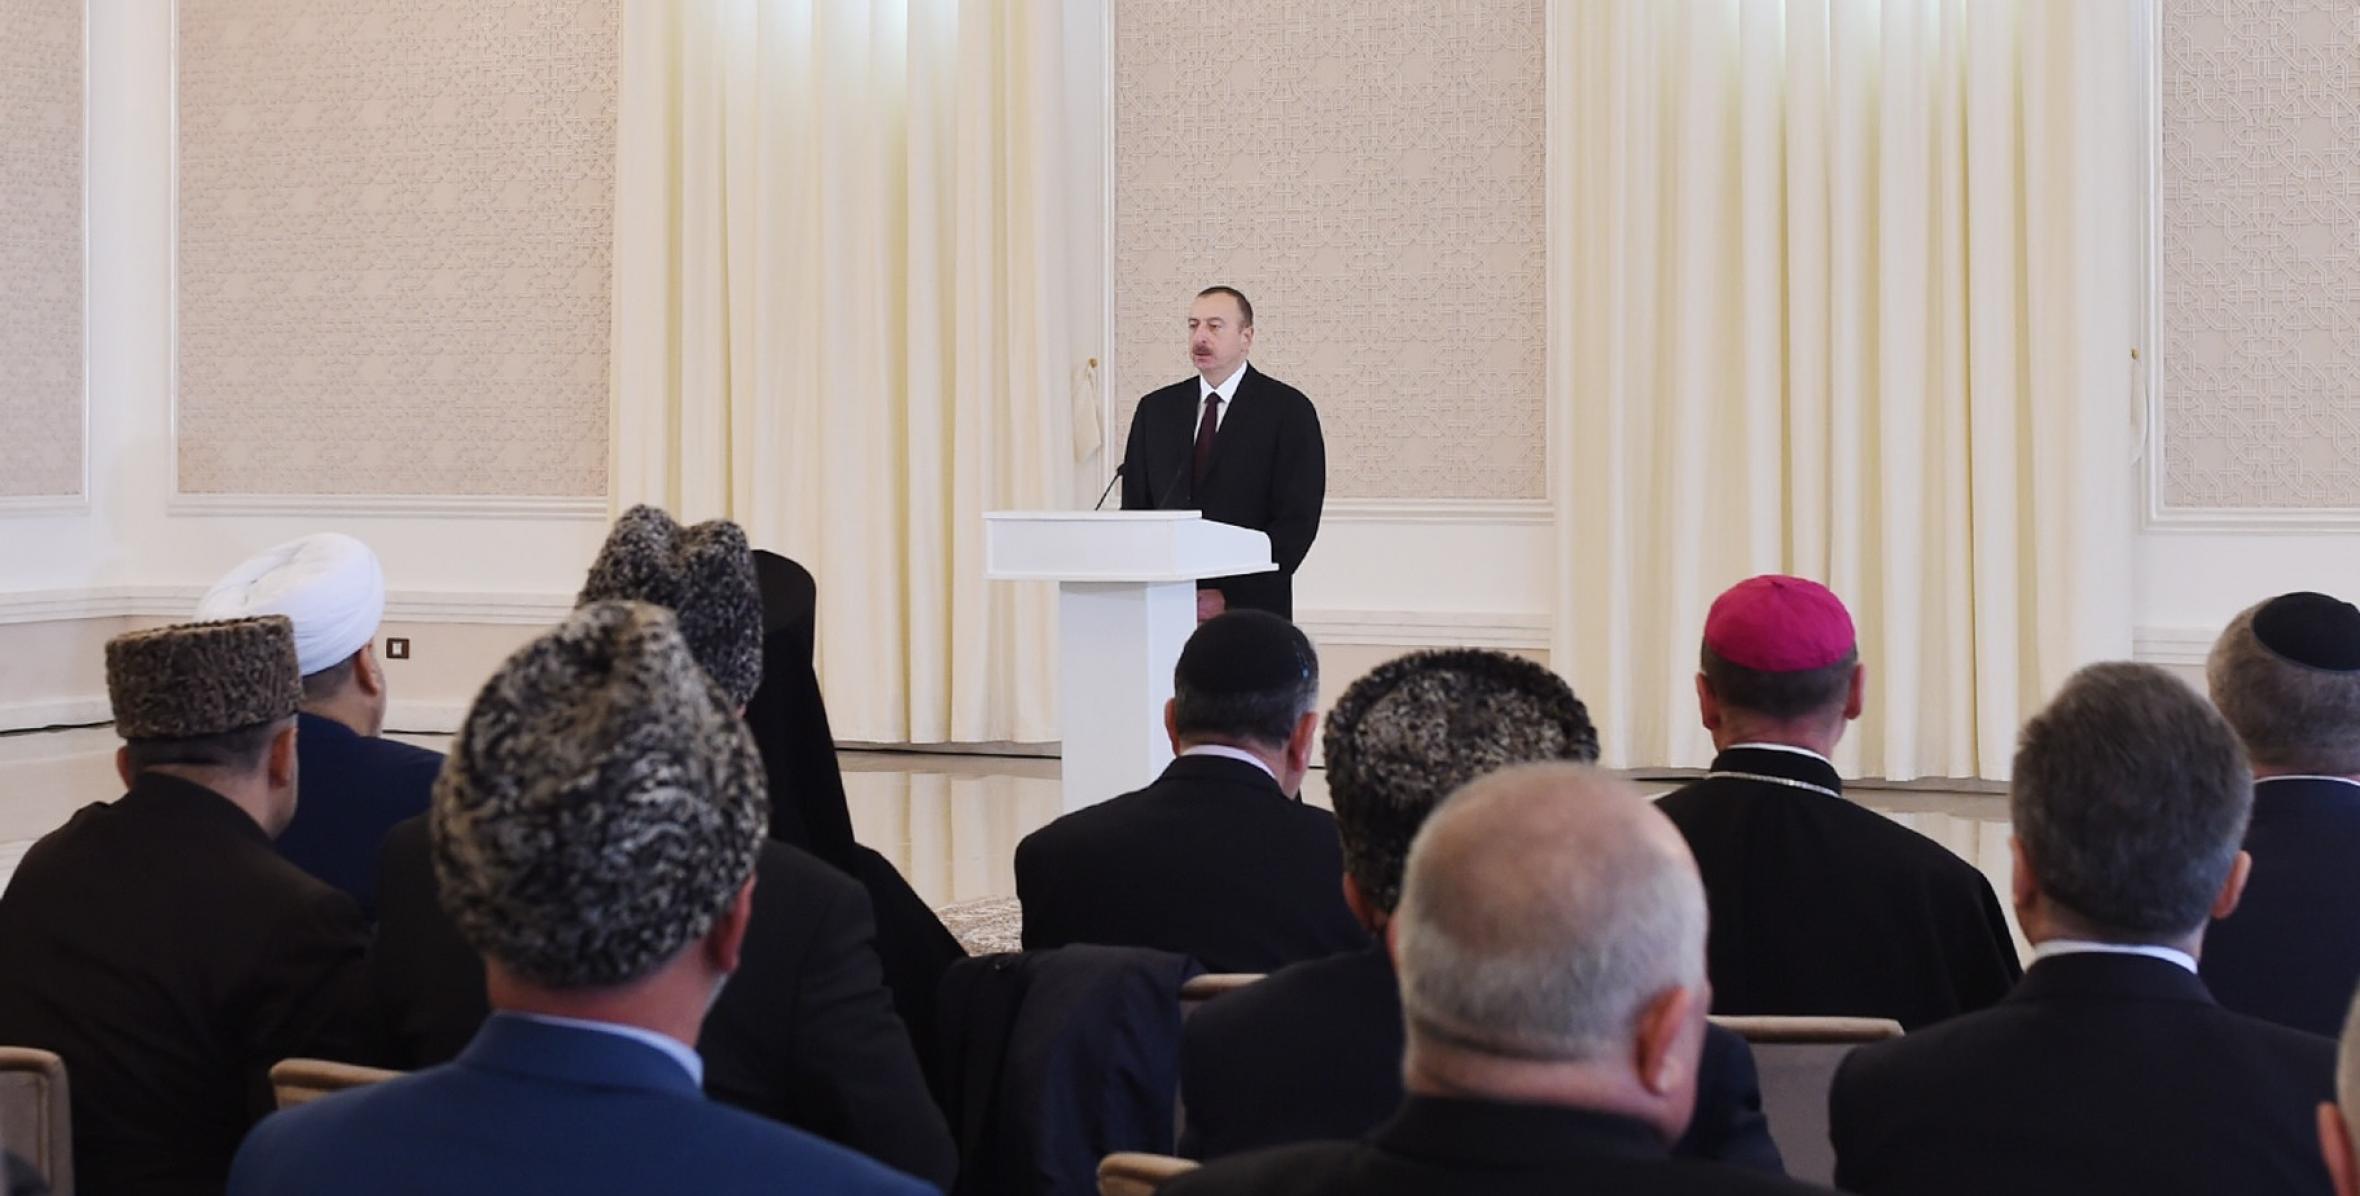 Speech by Ilham Aliyev at the Imamzade religious complex in Ganja